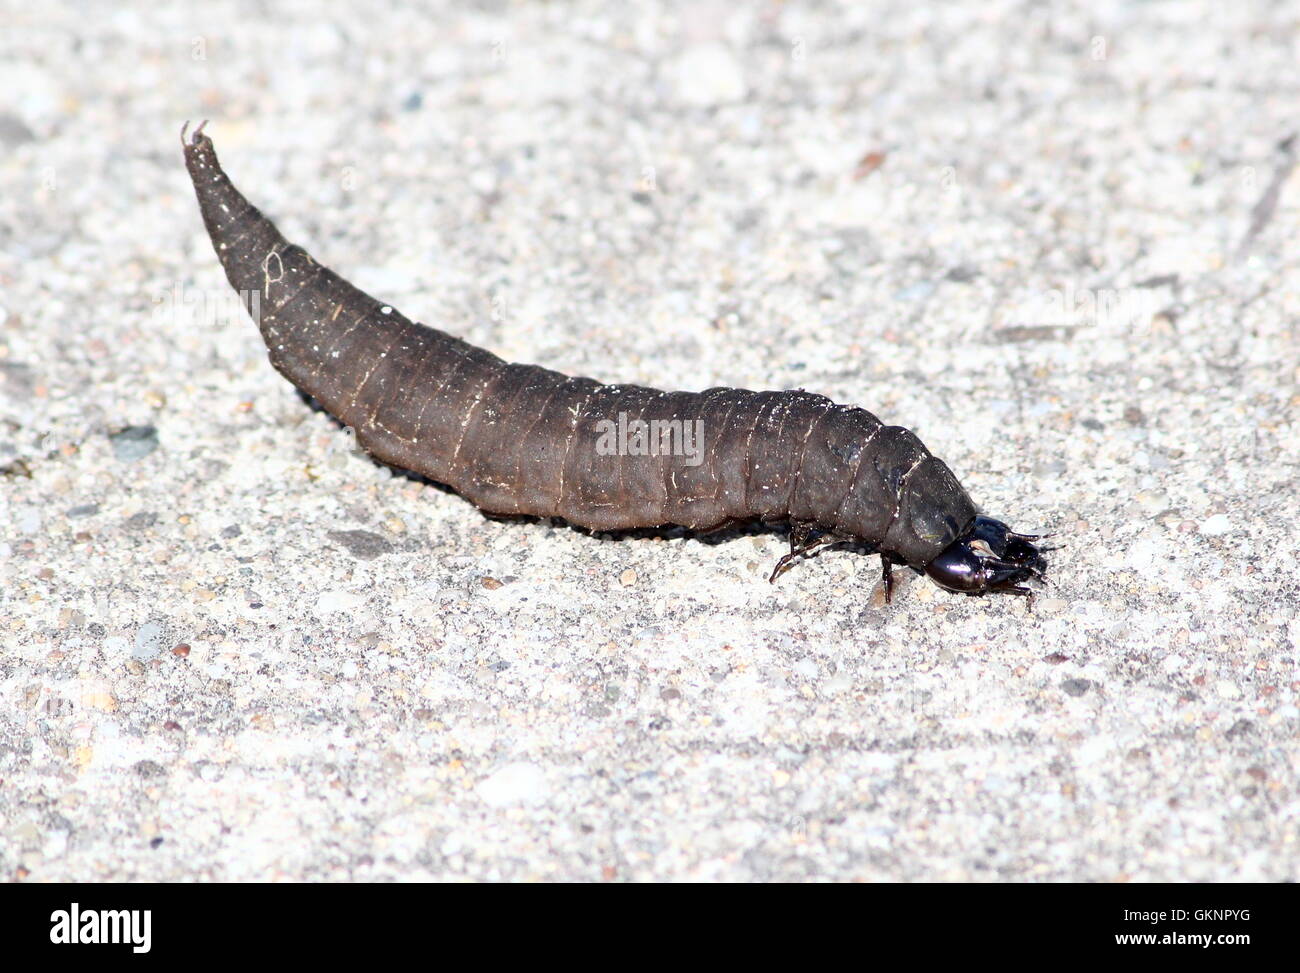 Larva of the European Great silver water beetle (Hydrophilus piceus) A.k.a Brown Hydrophile or Giant diving beetle. Stock Photo